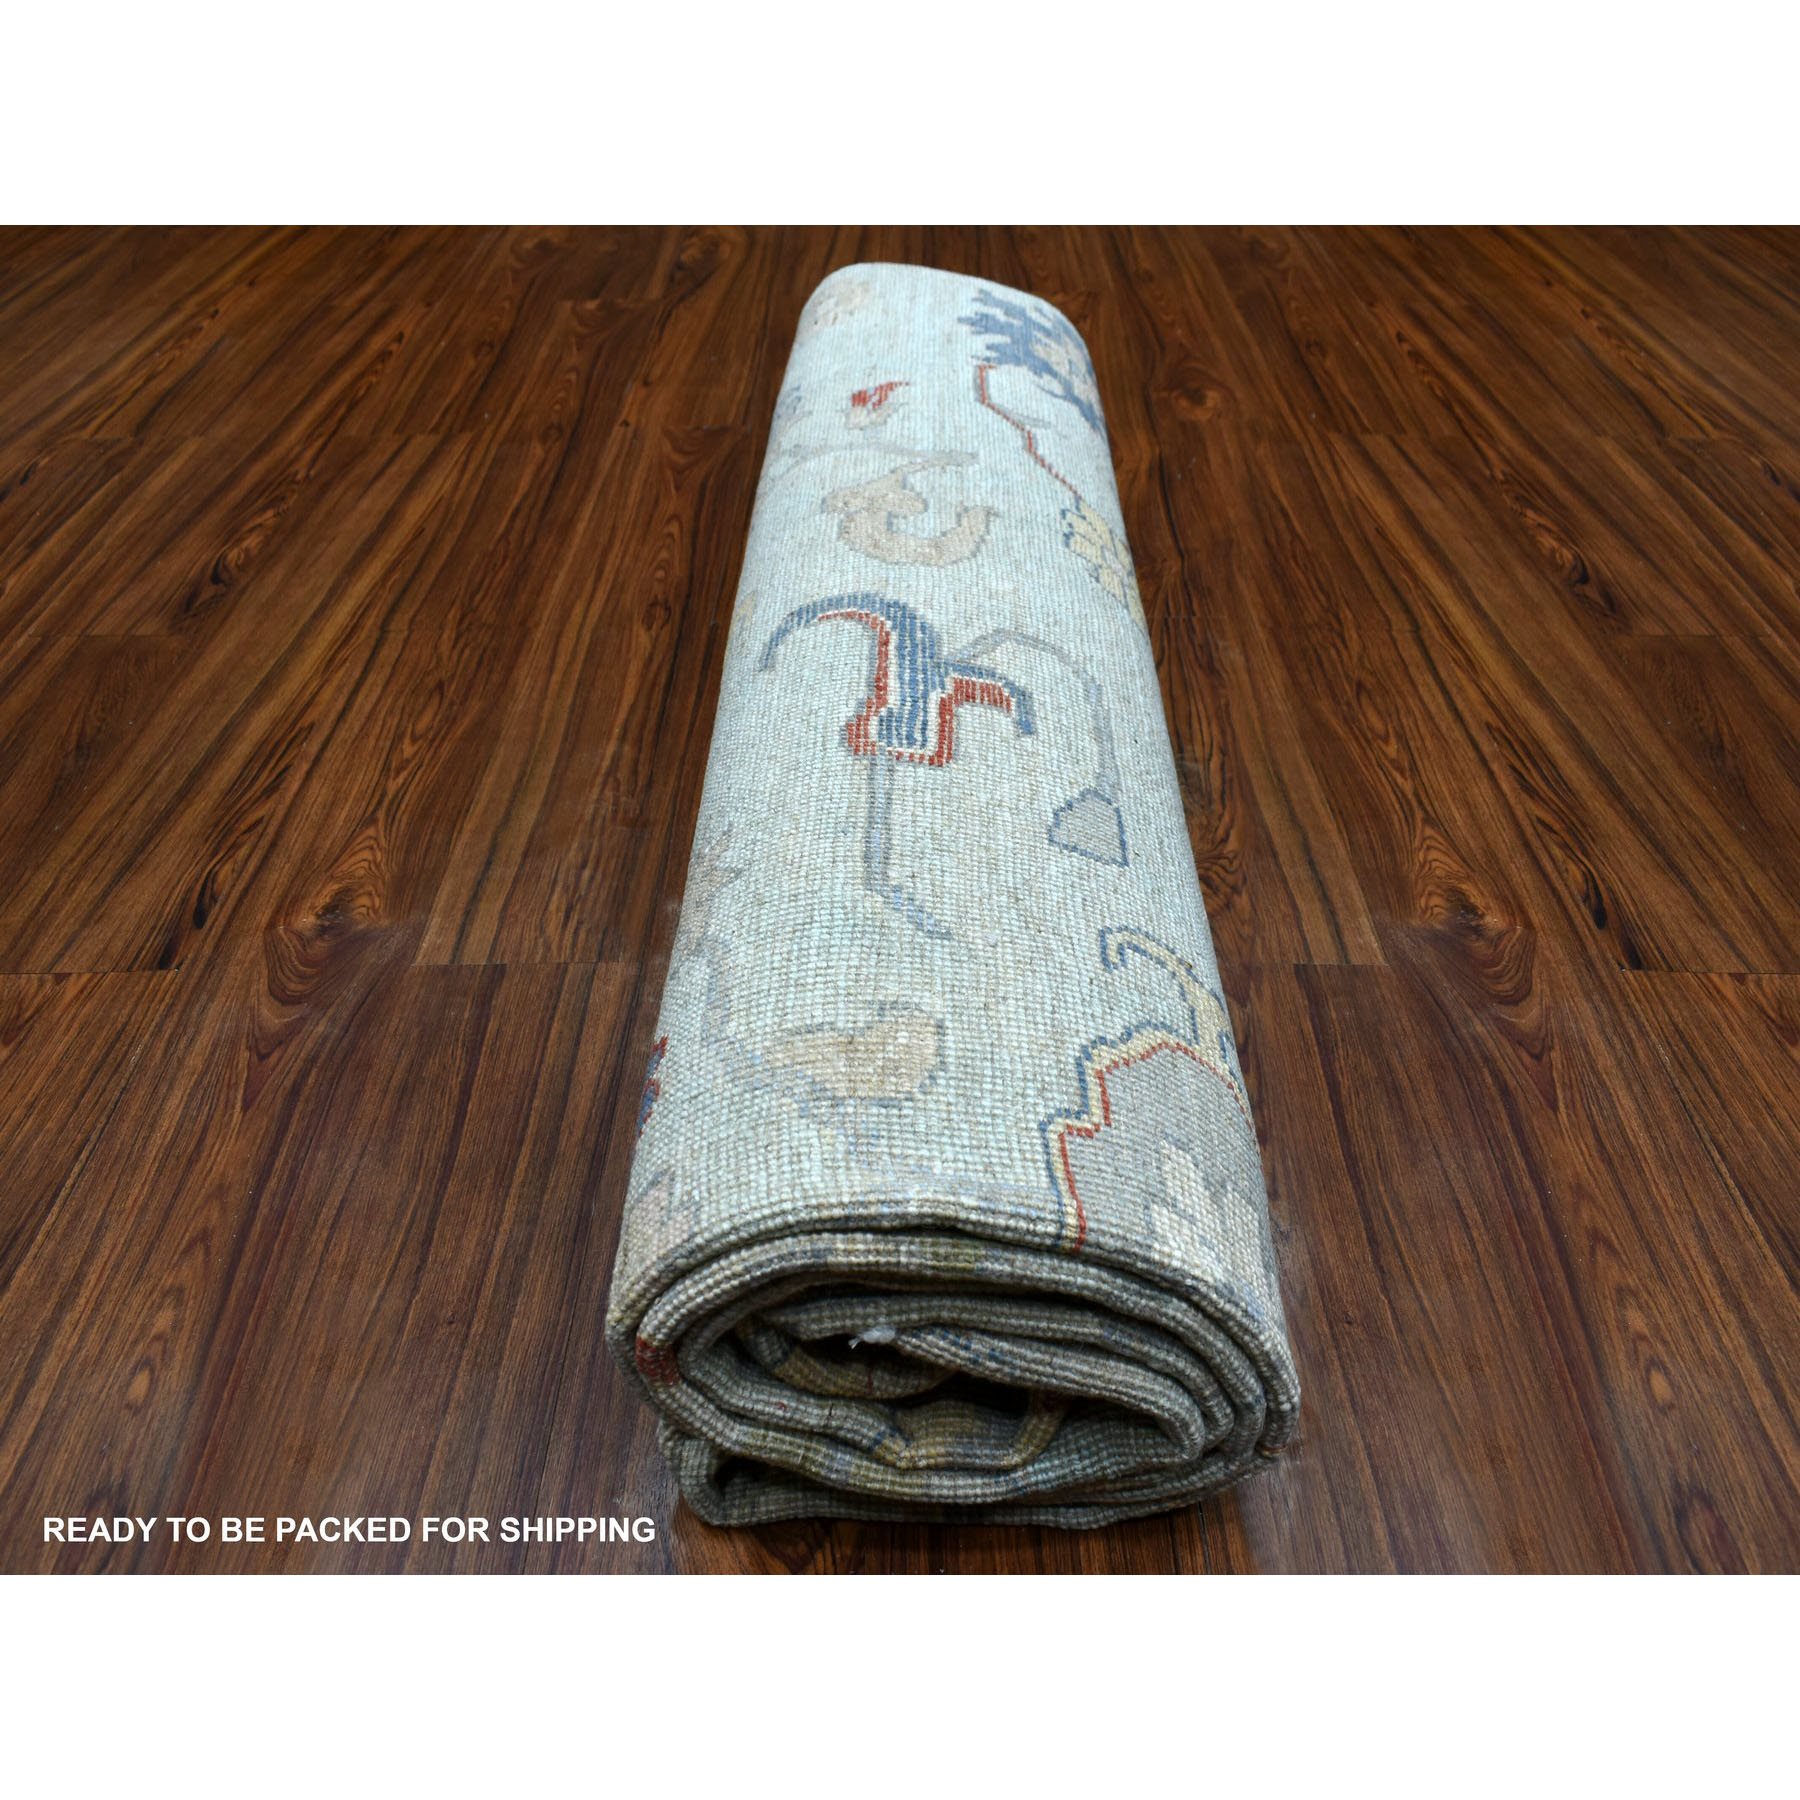 8'x9'9" Hand Woven Faded Blue Pure Wool Afghan Angora Ushak with All Over Leaf Design Oriental Rug 